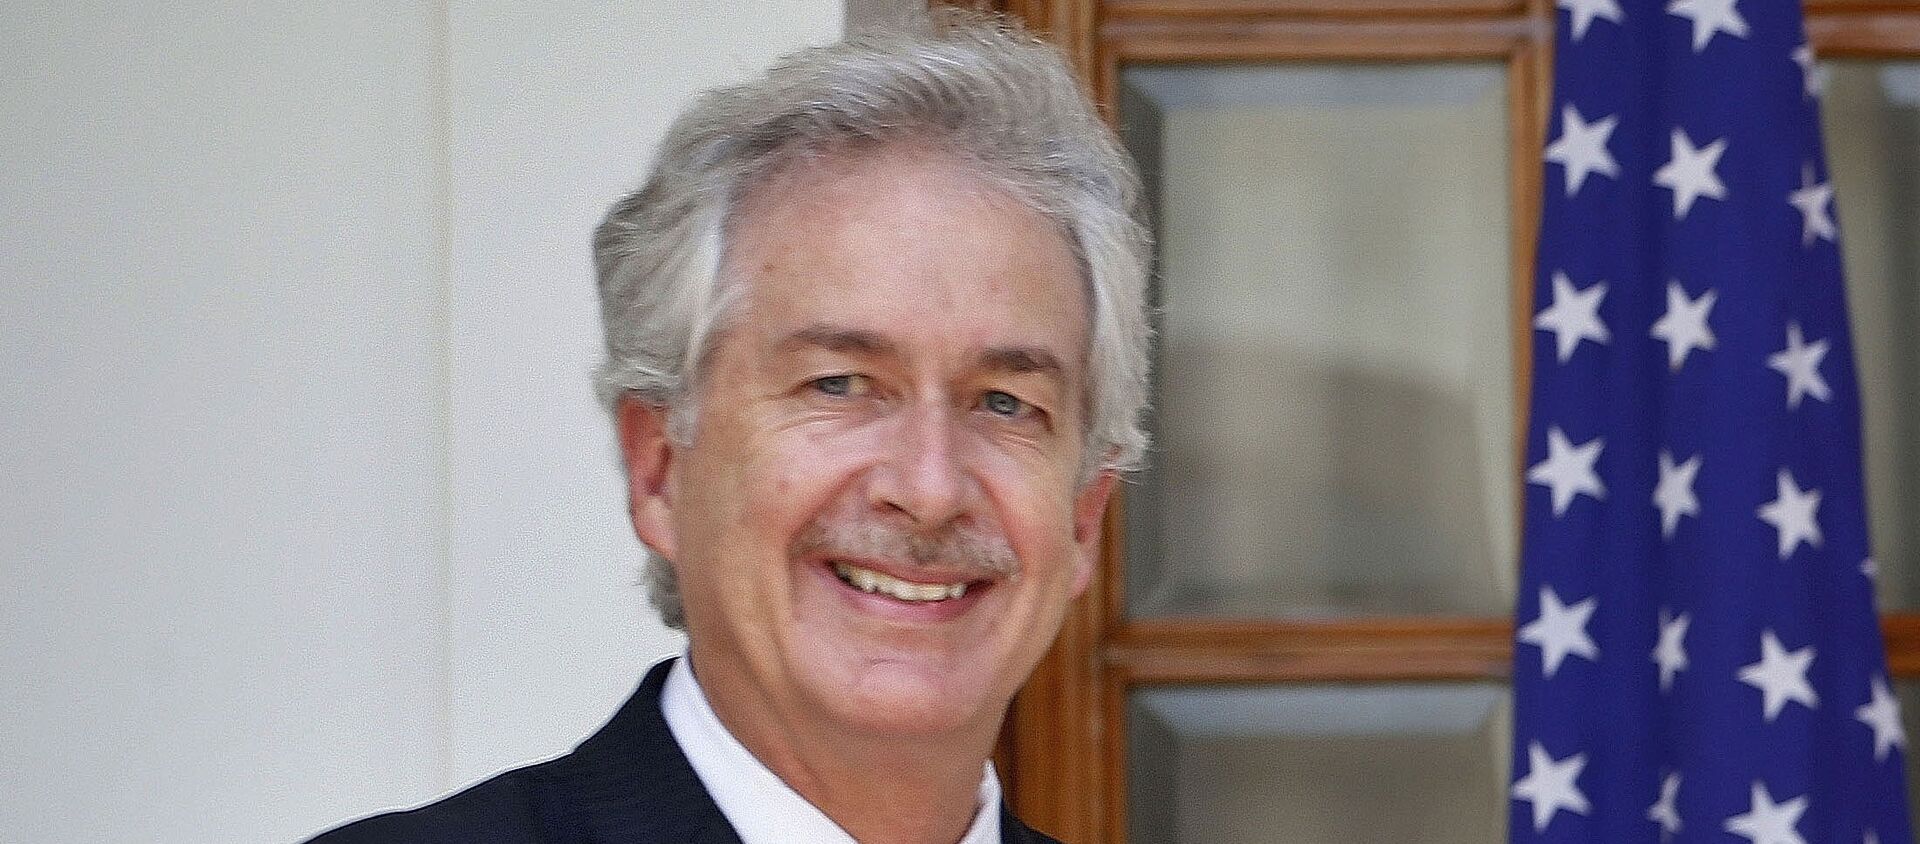 In this July 10, 2014 file photo, then U.S. Deputy Secretary of State William Burns, is shown in New Delhi, India.  President-elect Joe Biden has chosen veteran diplomat William Burns to be his CIA director. Biden made the announcement on Monday.  - Sputnik International, 1920, 10.08.2021